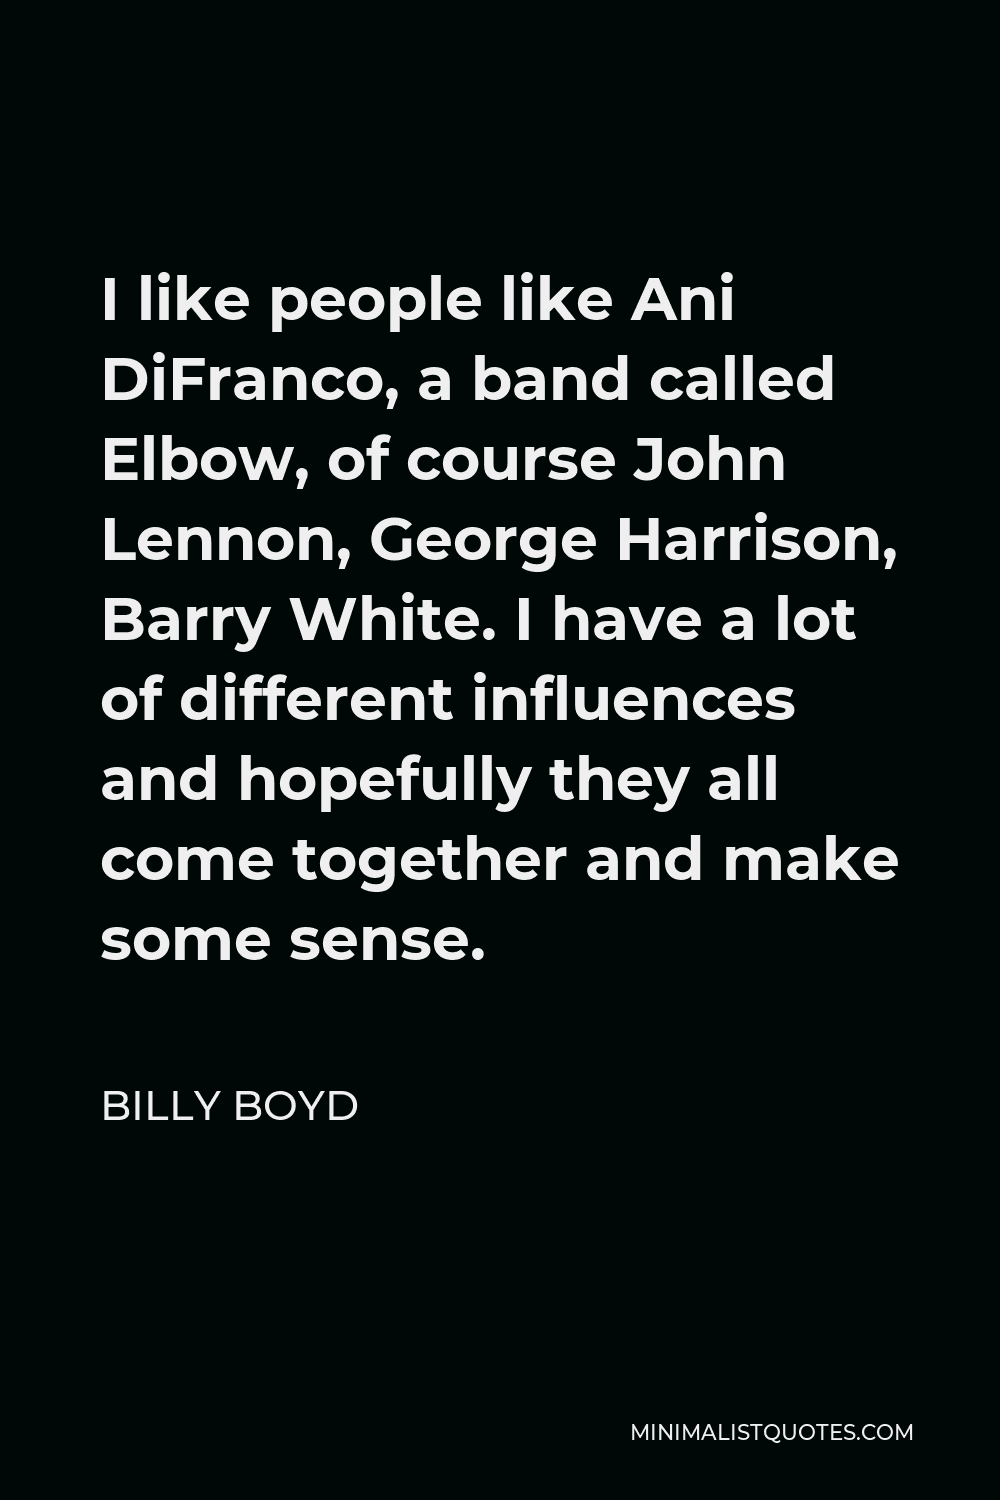 Billy Boyd Quote - I like people like Ani DiFranco, a band called Elbow, of course John Lennon, George Harrison, Barry White. I have a lot of different influences and hopefully they all come together and make some sense.